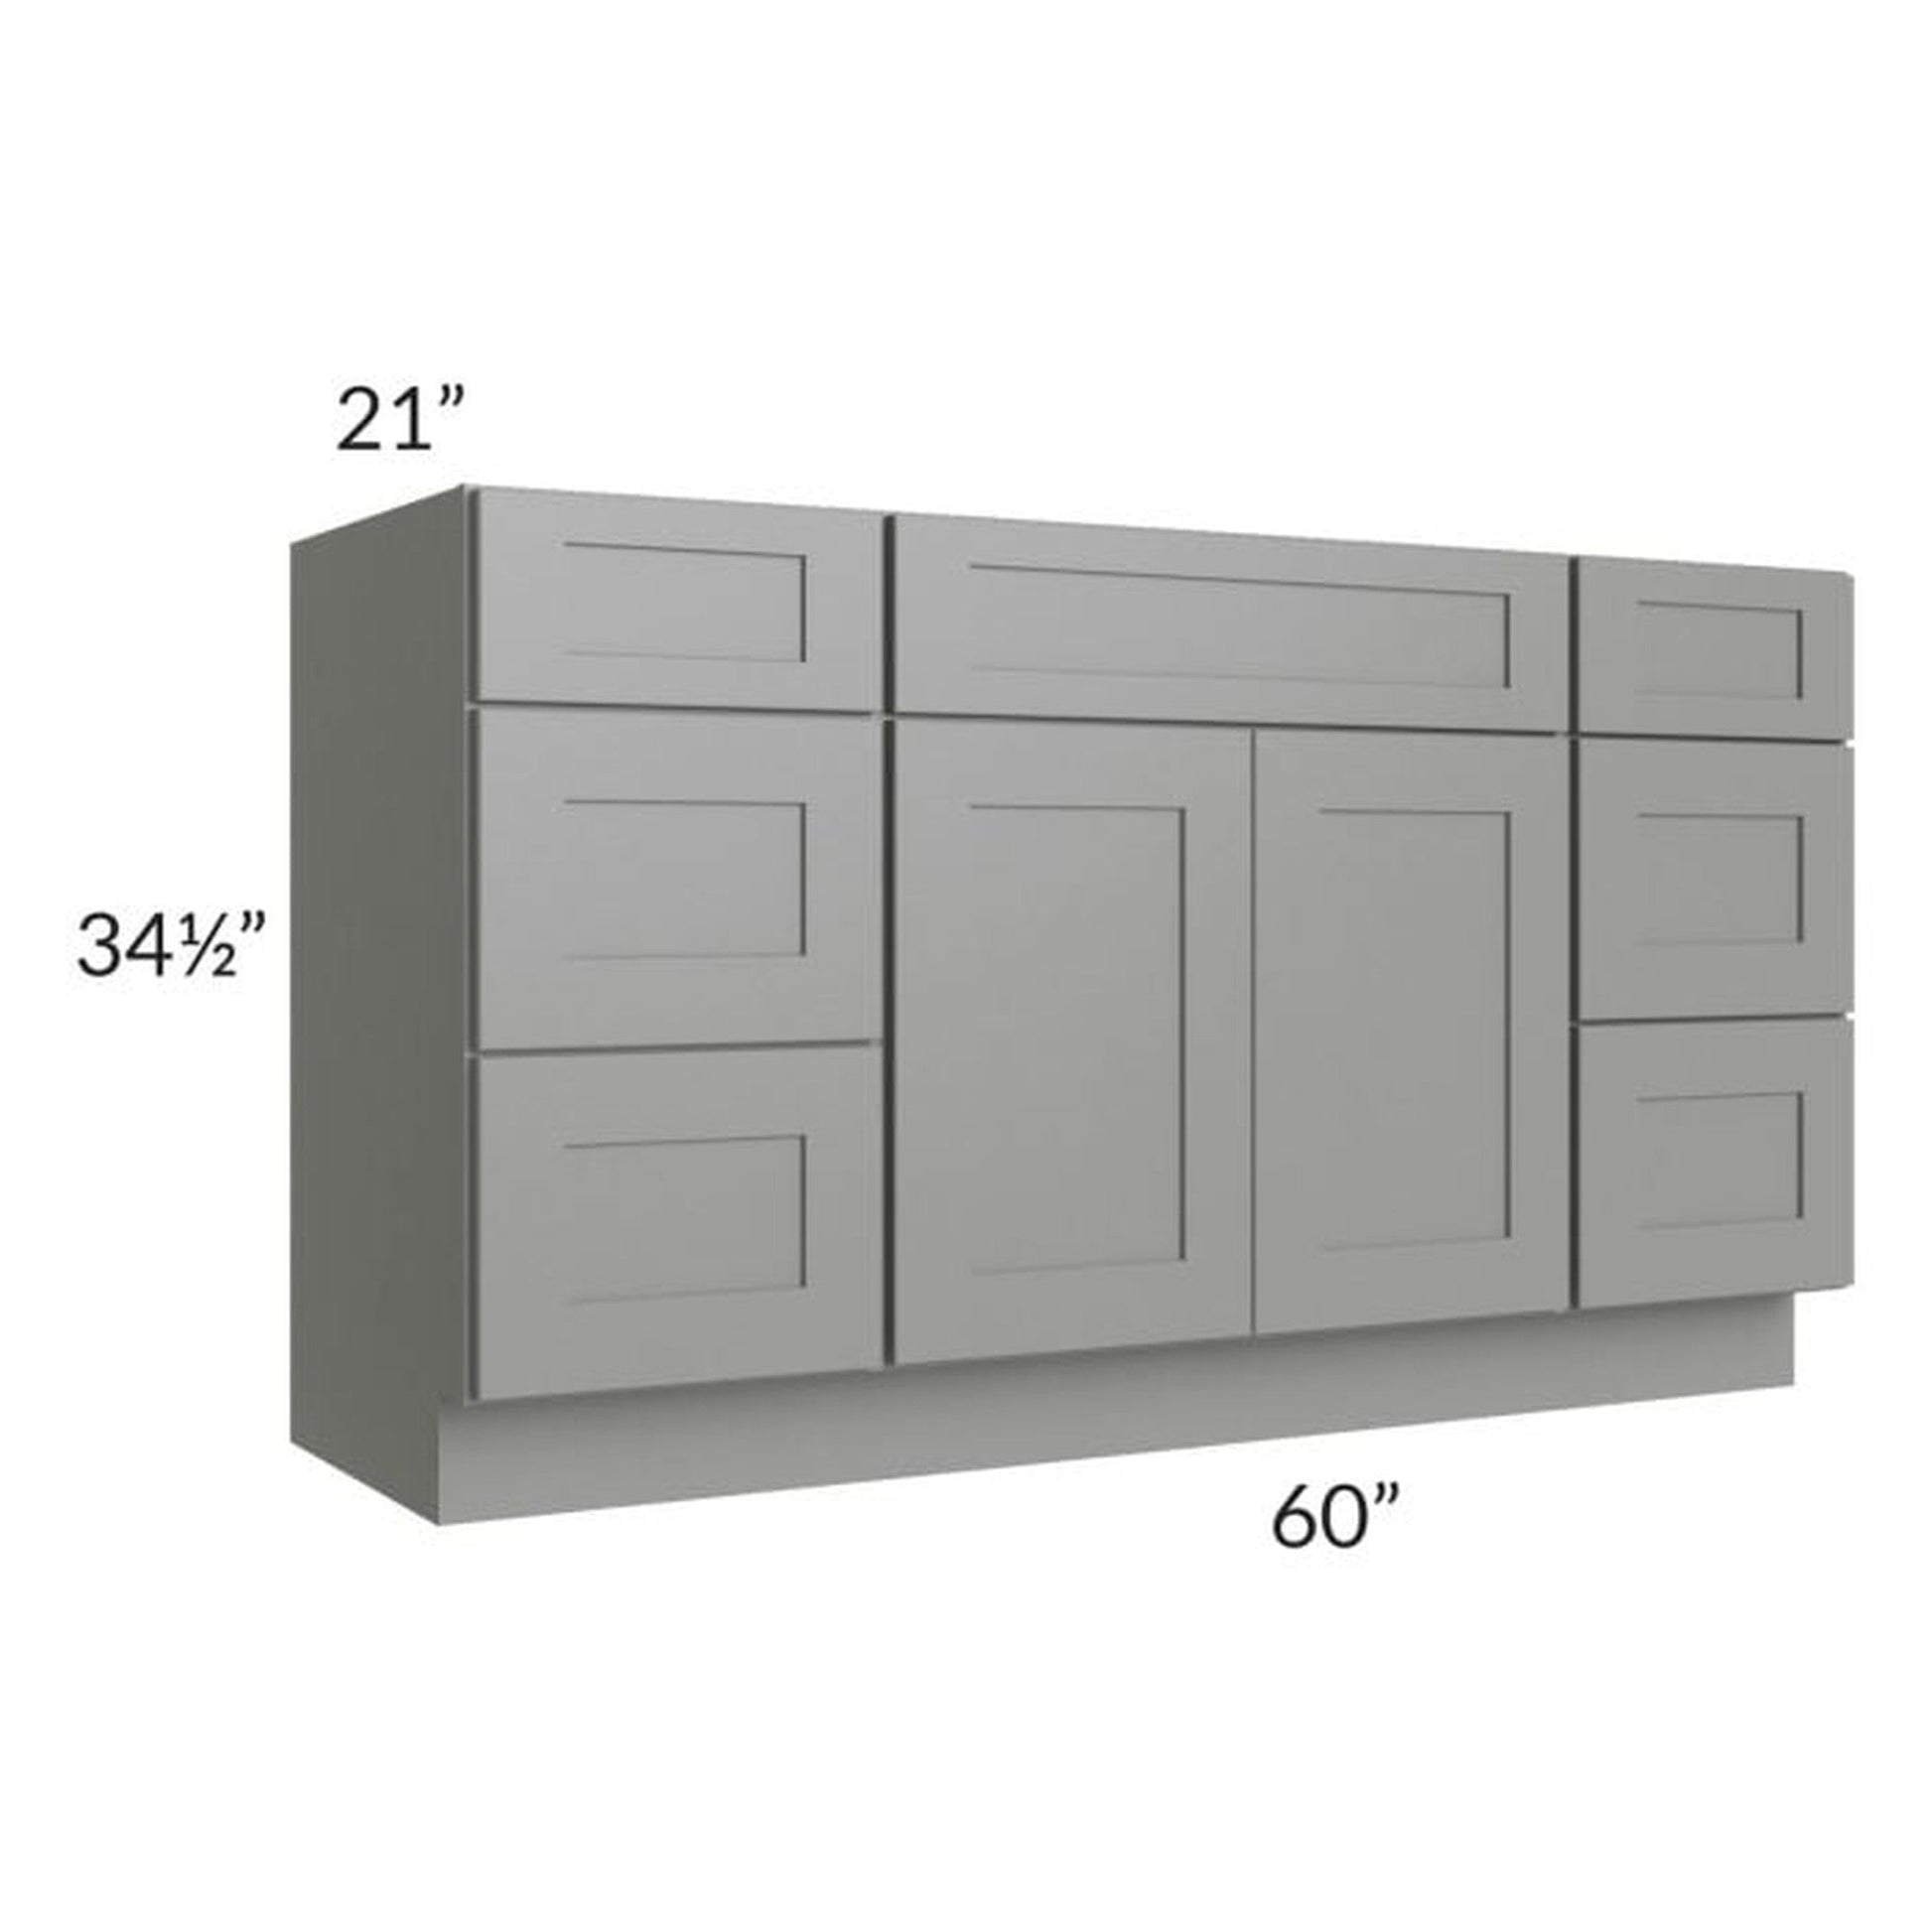 RTA Shale Grey Shaker 60" Vanity Sink Base Cabinet PS-V6021DD with Drawers with 1 Decorative End Panel